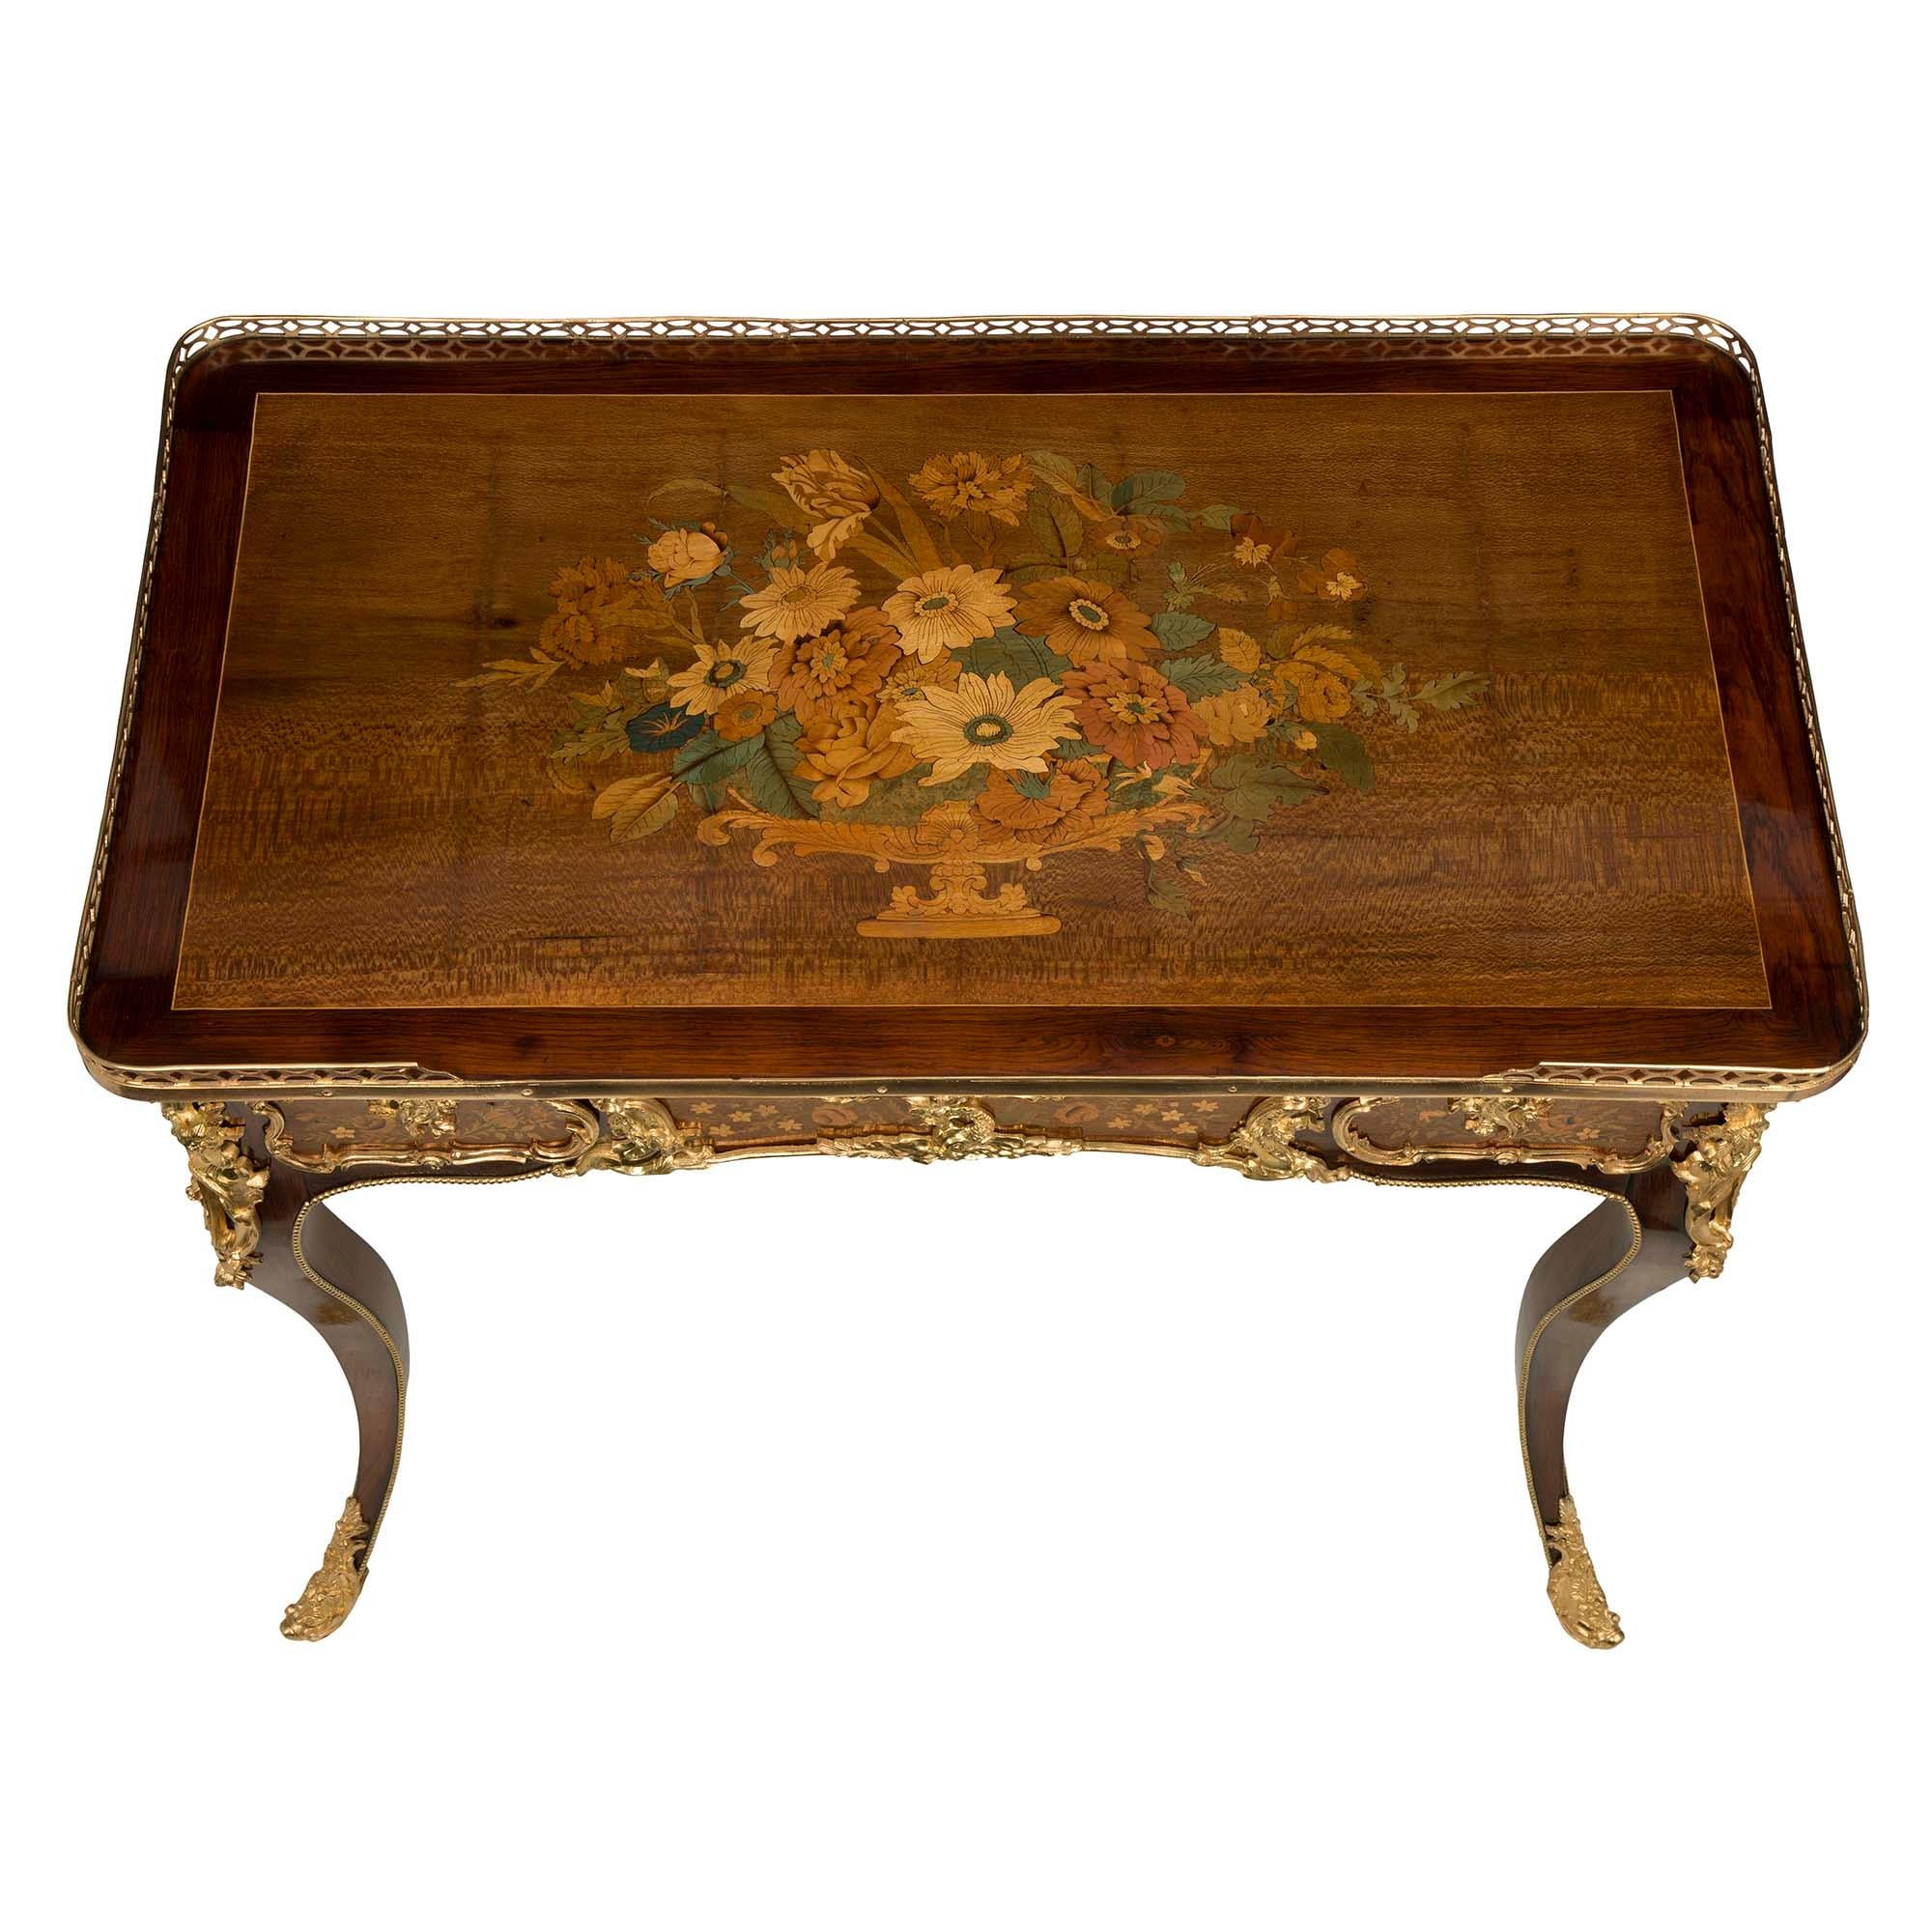 An elegant French 19th century Louis XV St. Charnwood, tulipwood, and ormolu side table or writing desk. The table is raised by beautiful cabriole legs with fine wrap-around pierced ormolu sabots with a foliate design. A beaded ormolu chute extends